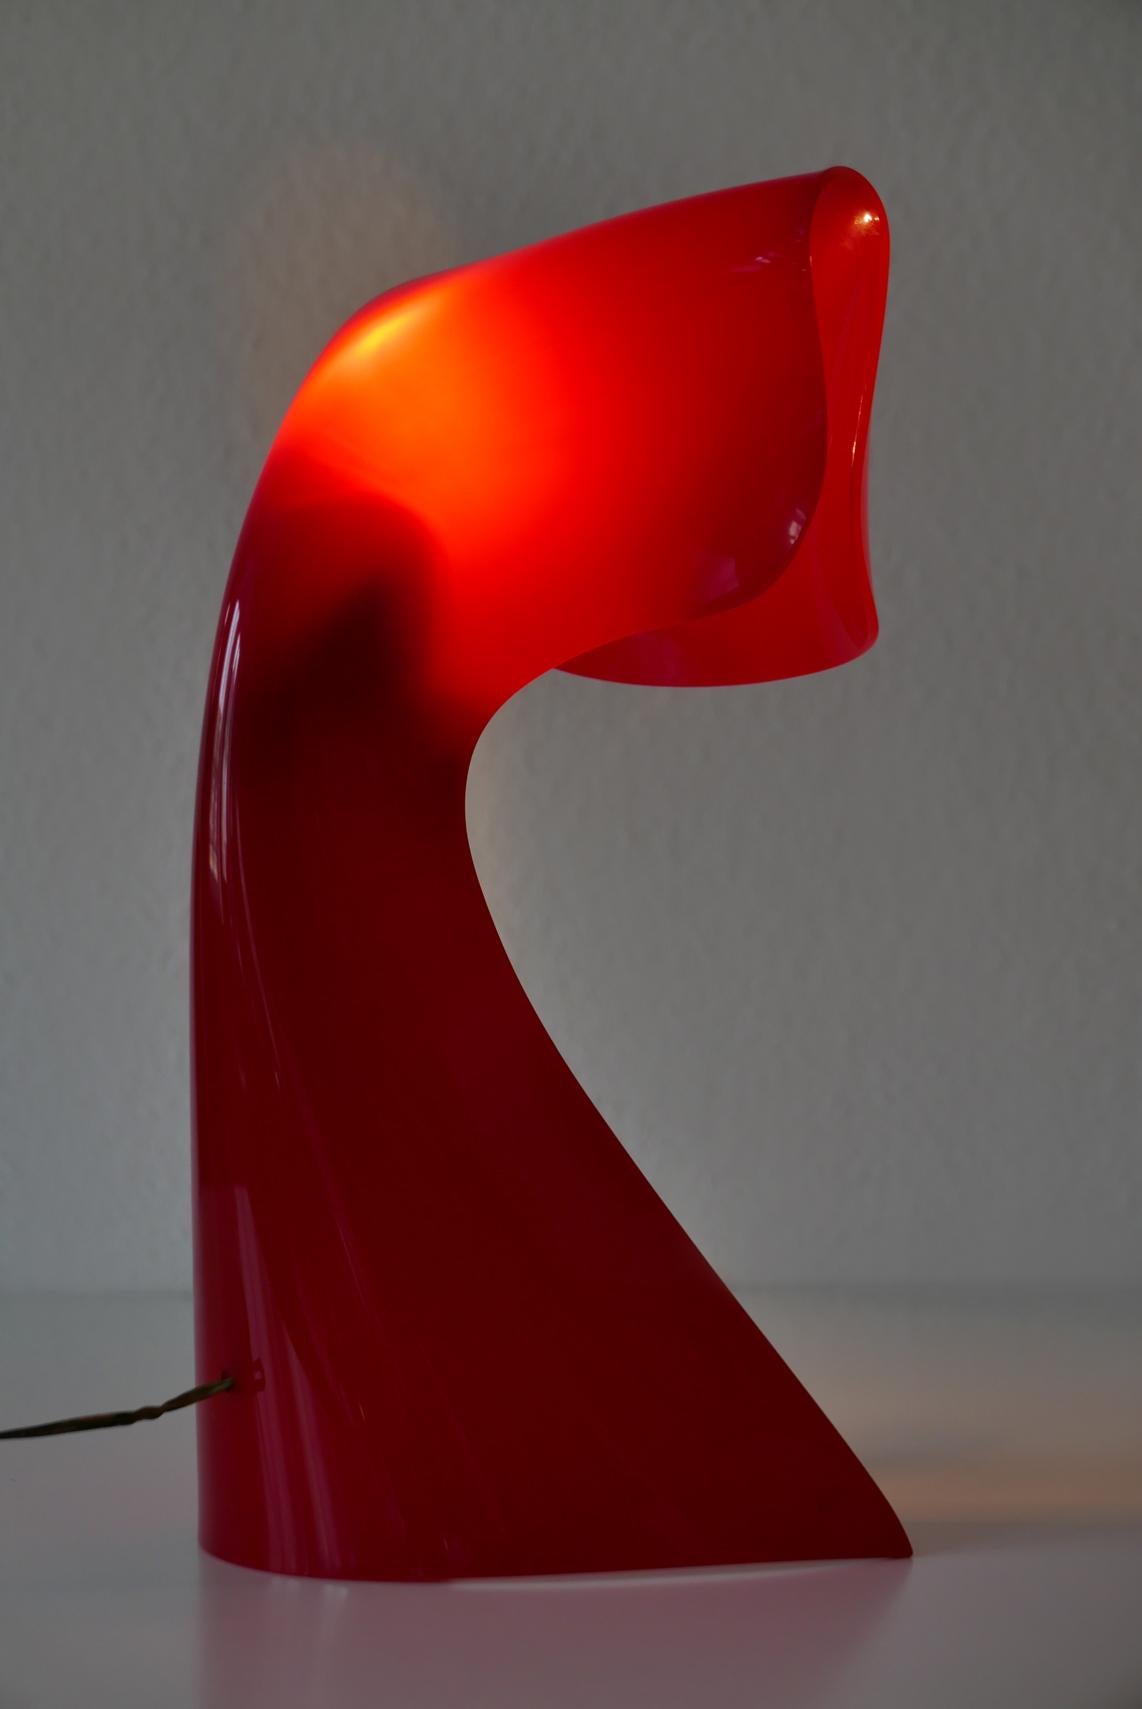 Exceptional Table Lamp by Hanns Hoffmann-Lederer for Heinz Hecht, 1950s, Germany For Sale 5